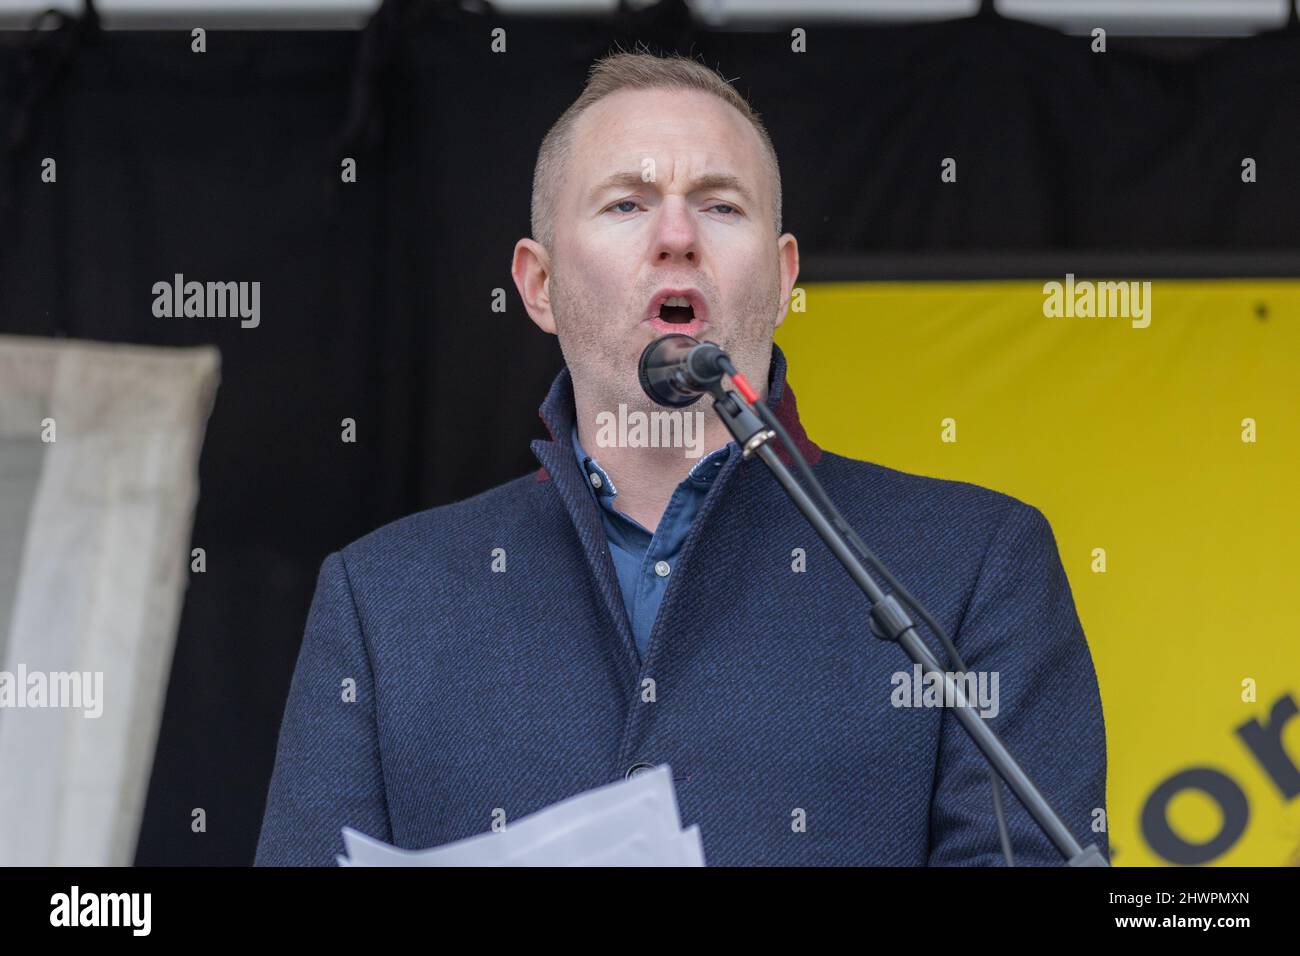 Sinn Féin MP for South Down Chris Hazzard speaks at a Stop the War Stop NATO expansion rally, Trafalgar Square, London, 6th Mar, 2022 Stock Photo